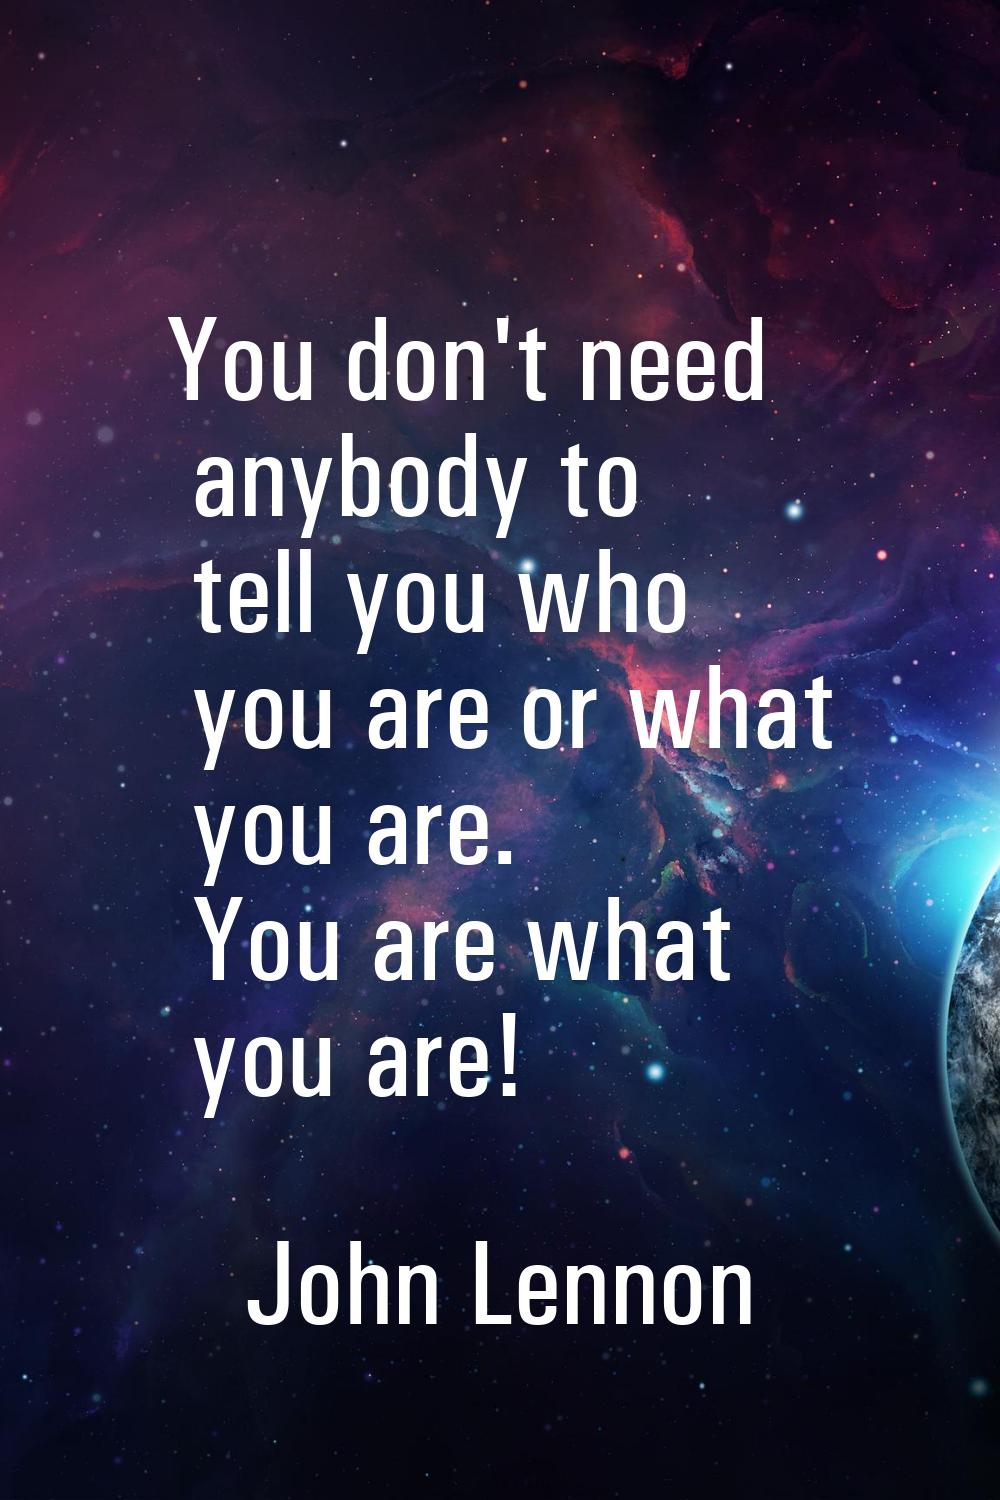 You don't need anybody to tell you who you are or what you are. You are what you are!